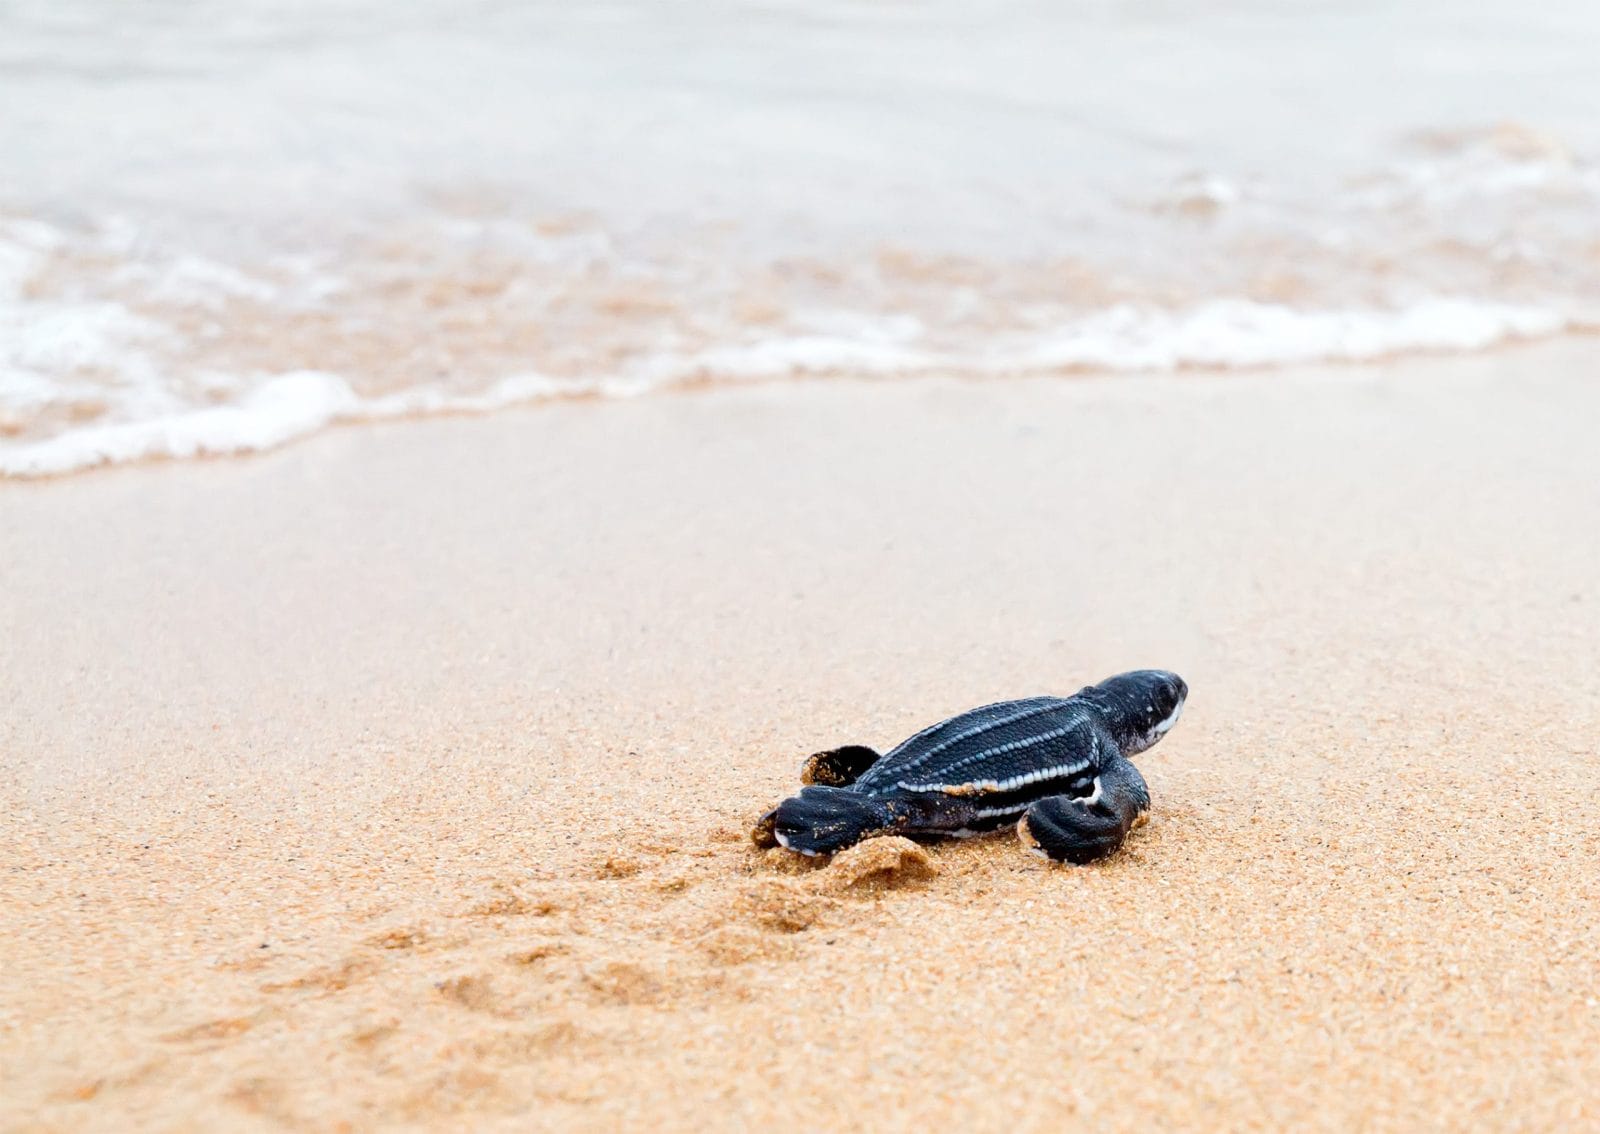 Newly hatched baby leatherback turtle